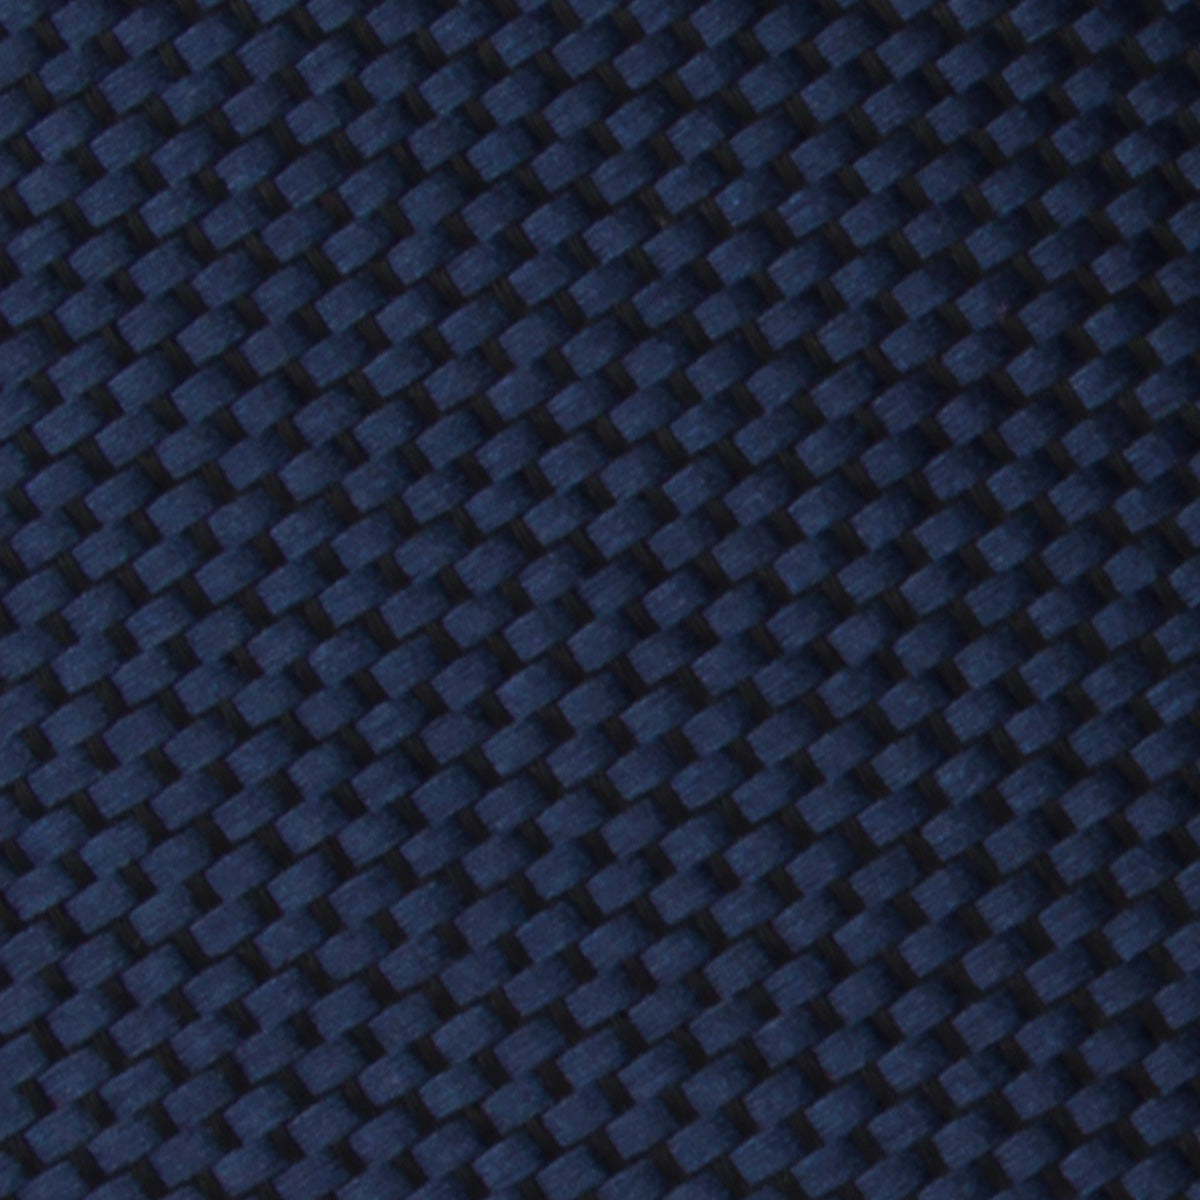 Midnight Blue Oxford Weave Fabric Swatch